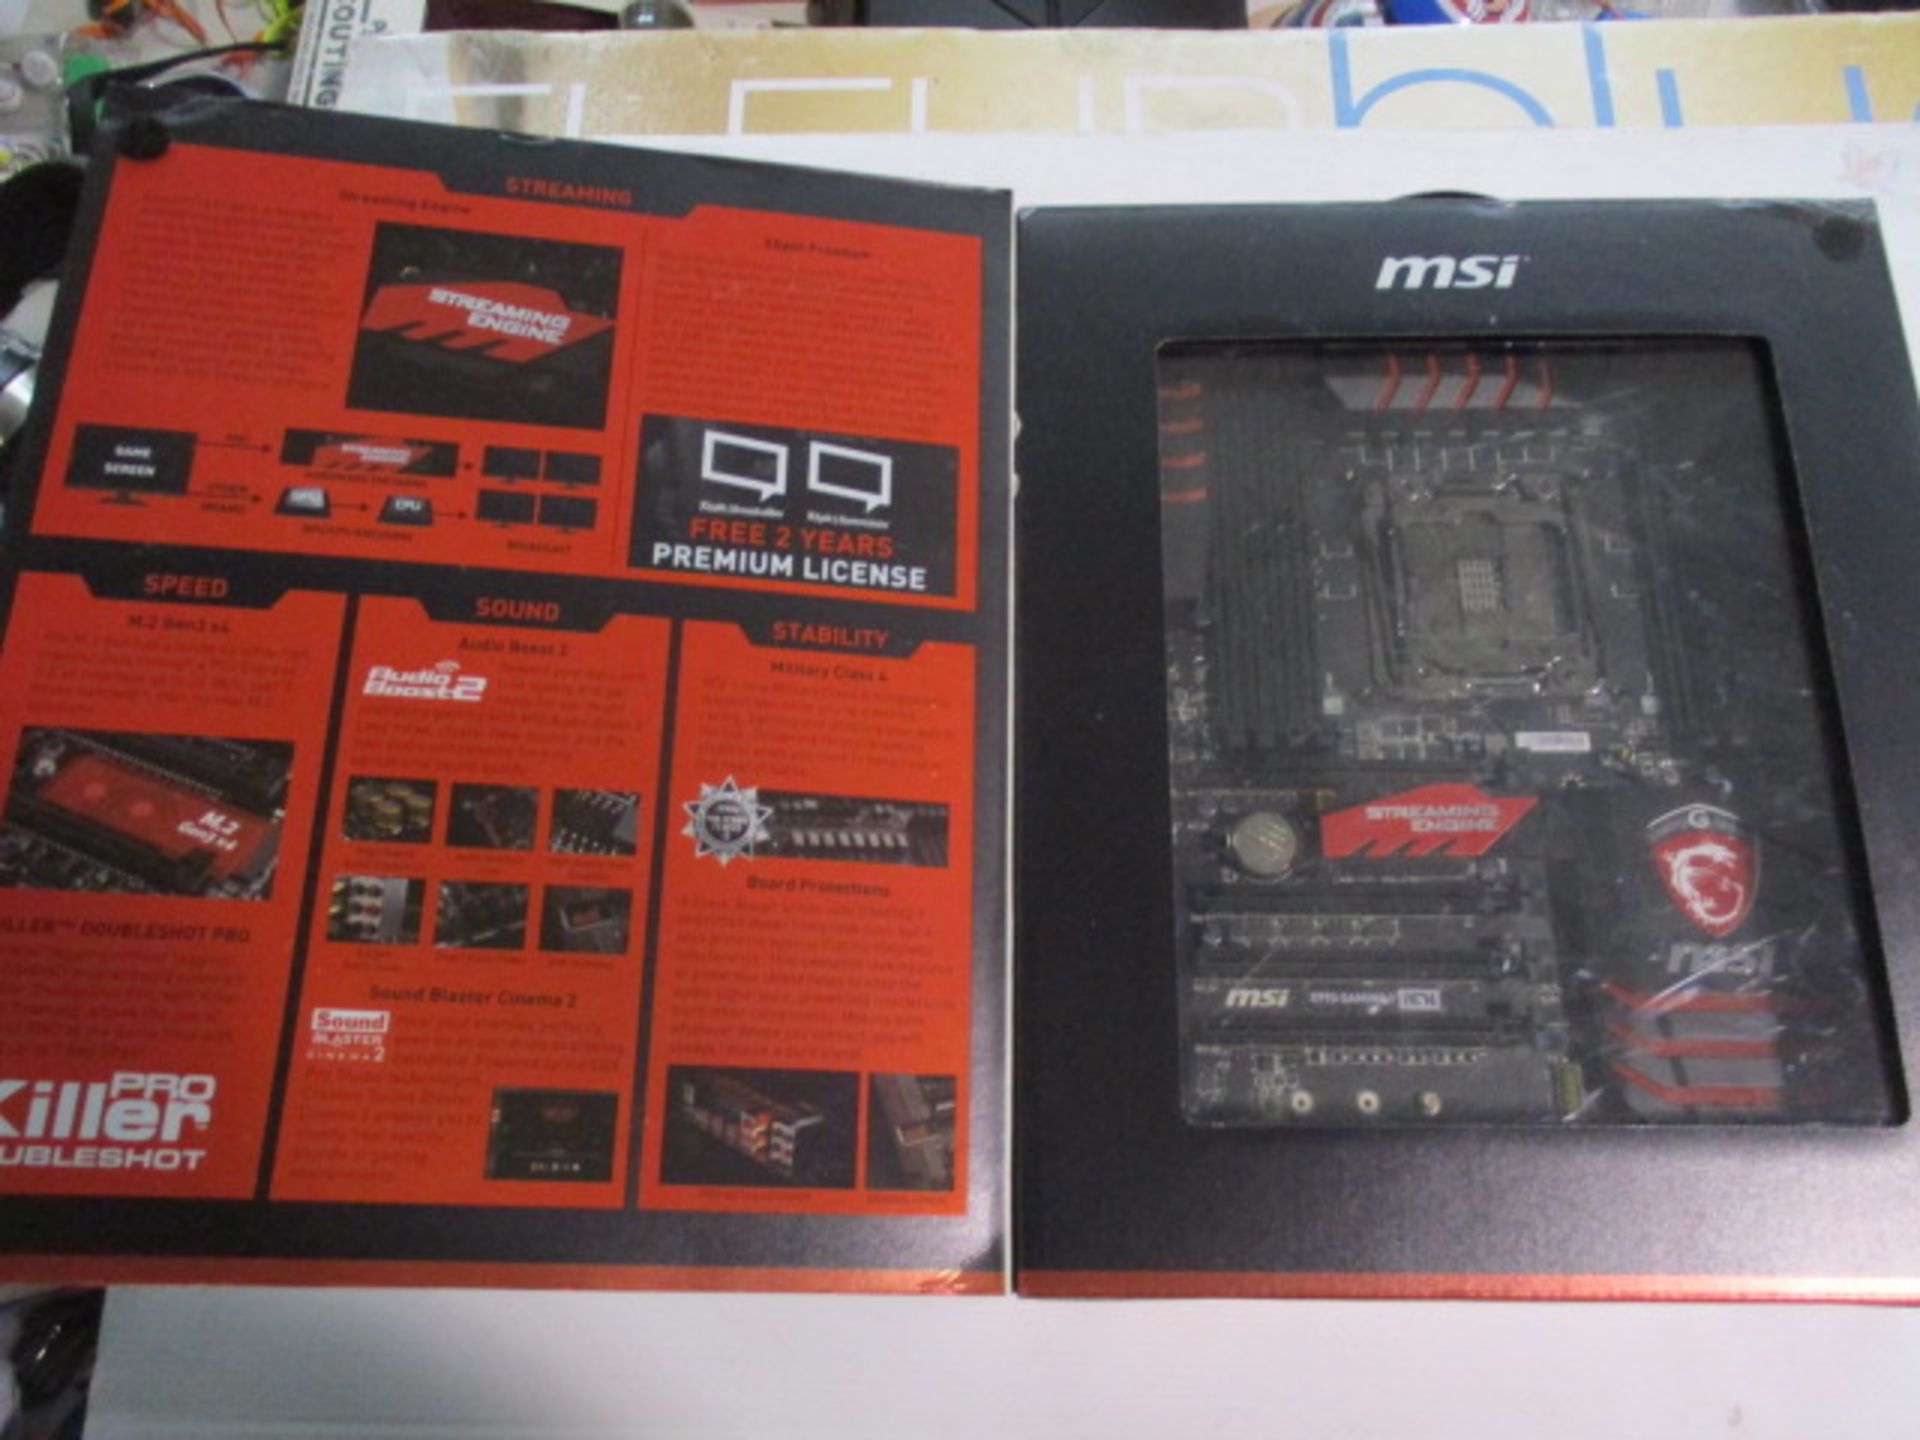 Msi Gaming X99s Streaming Engine Motherboard boxed and unchecked rrp £150+ - Image 2 of 3